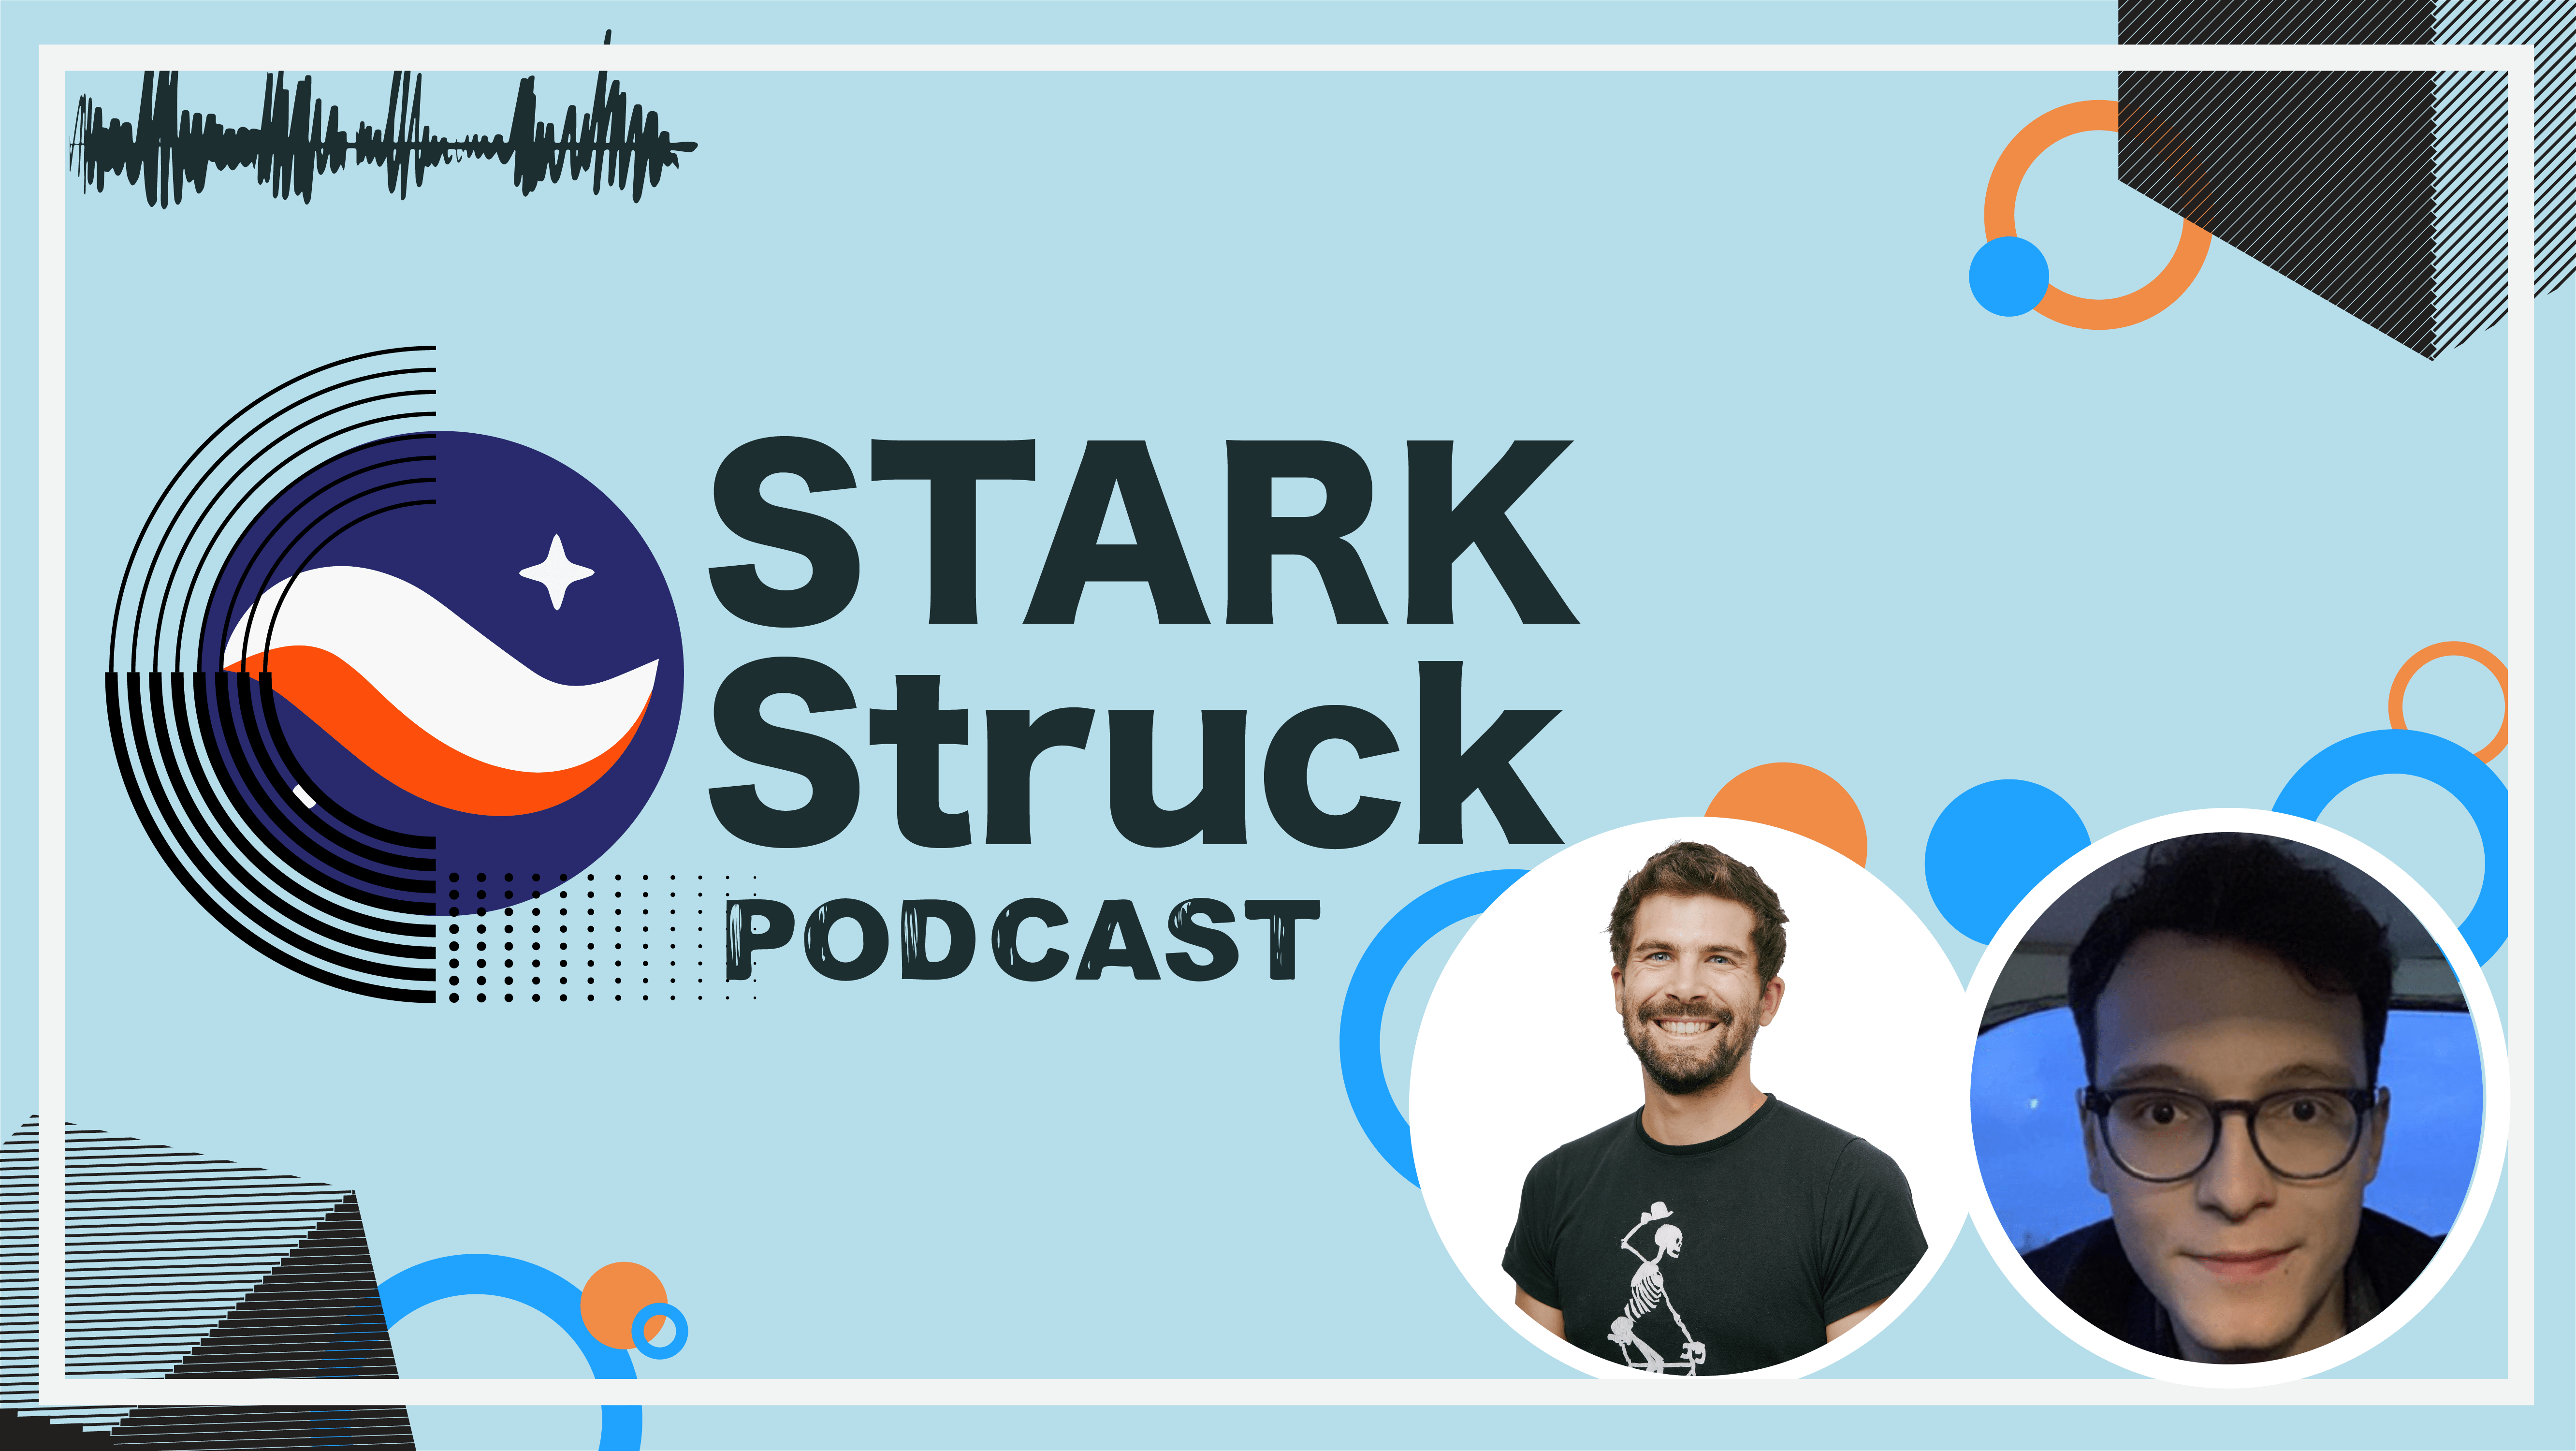 STARK Struck Podcast | Episode 8 | Henri Lieutaud with Marcello Bardus from Herodotus